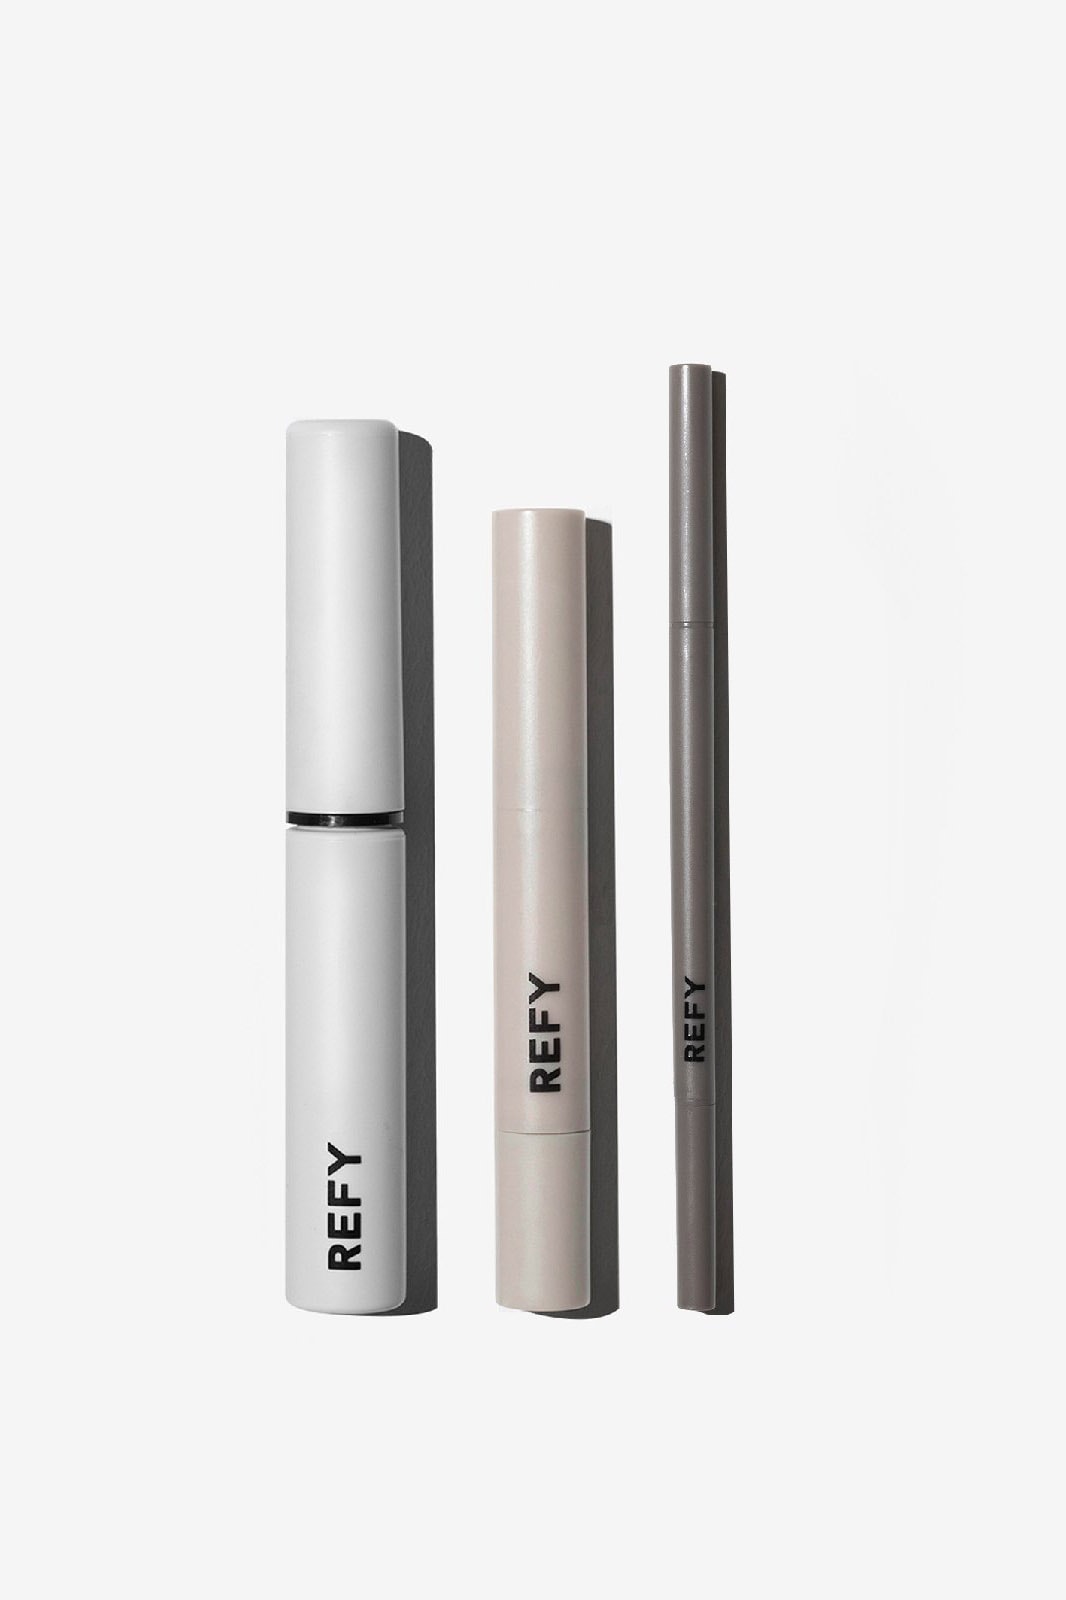 Cult British Brow Brand REFY Lands in Sephora Jess Hunt Eyebrows Makeup Beauty USA Canada